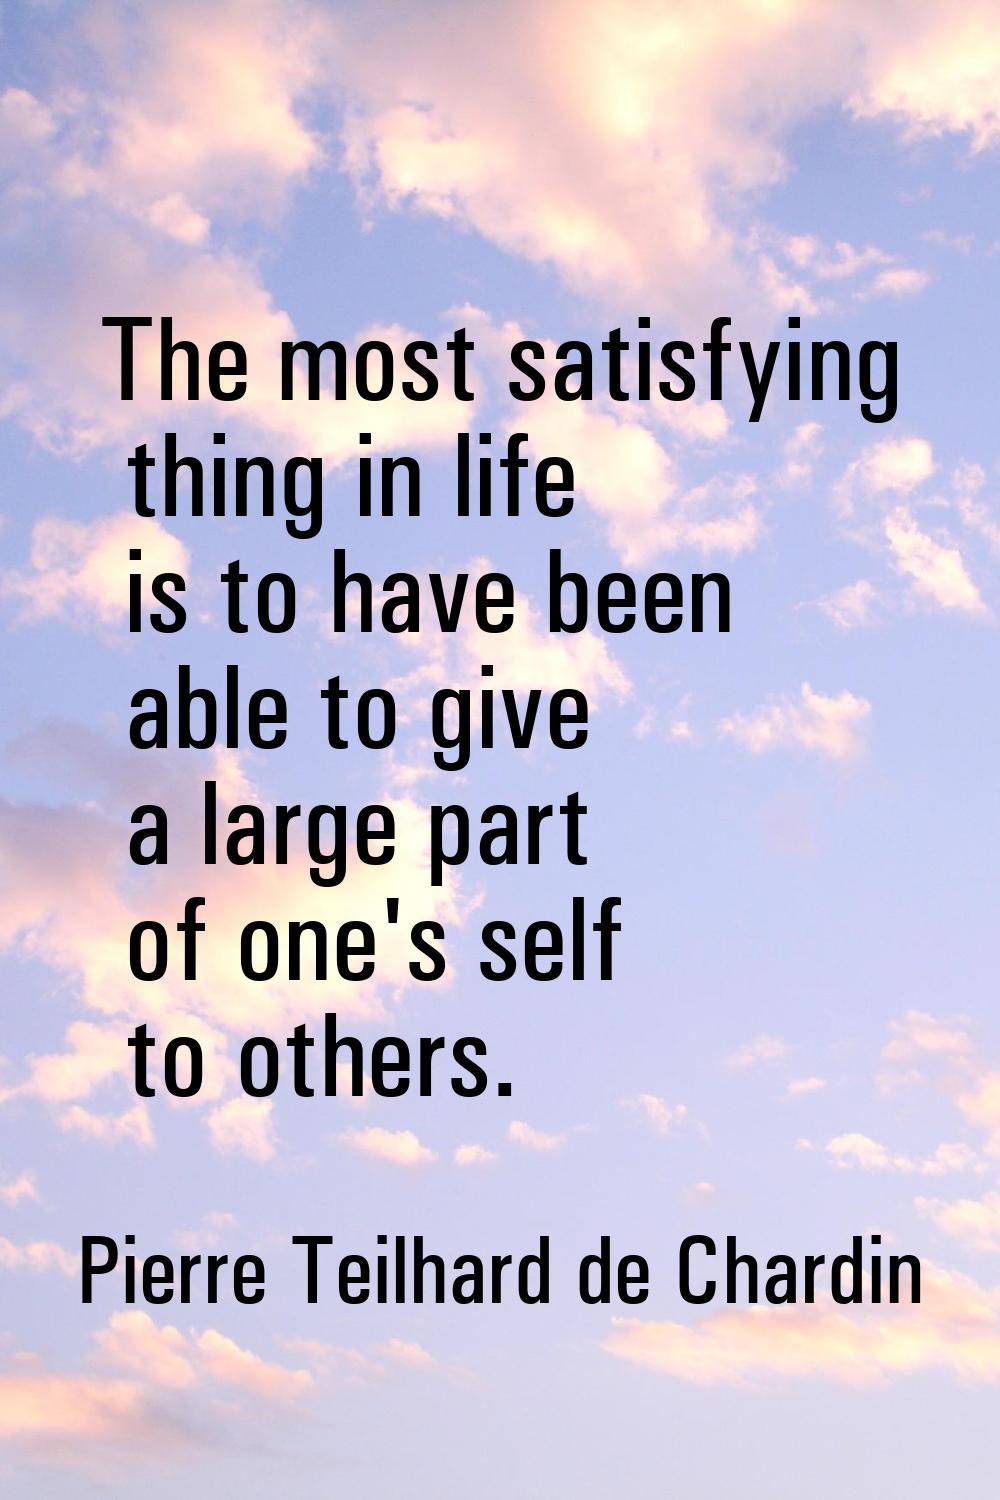 The most satisfying thing in life is to have been able to give a large part of one's self to others